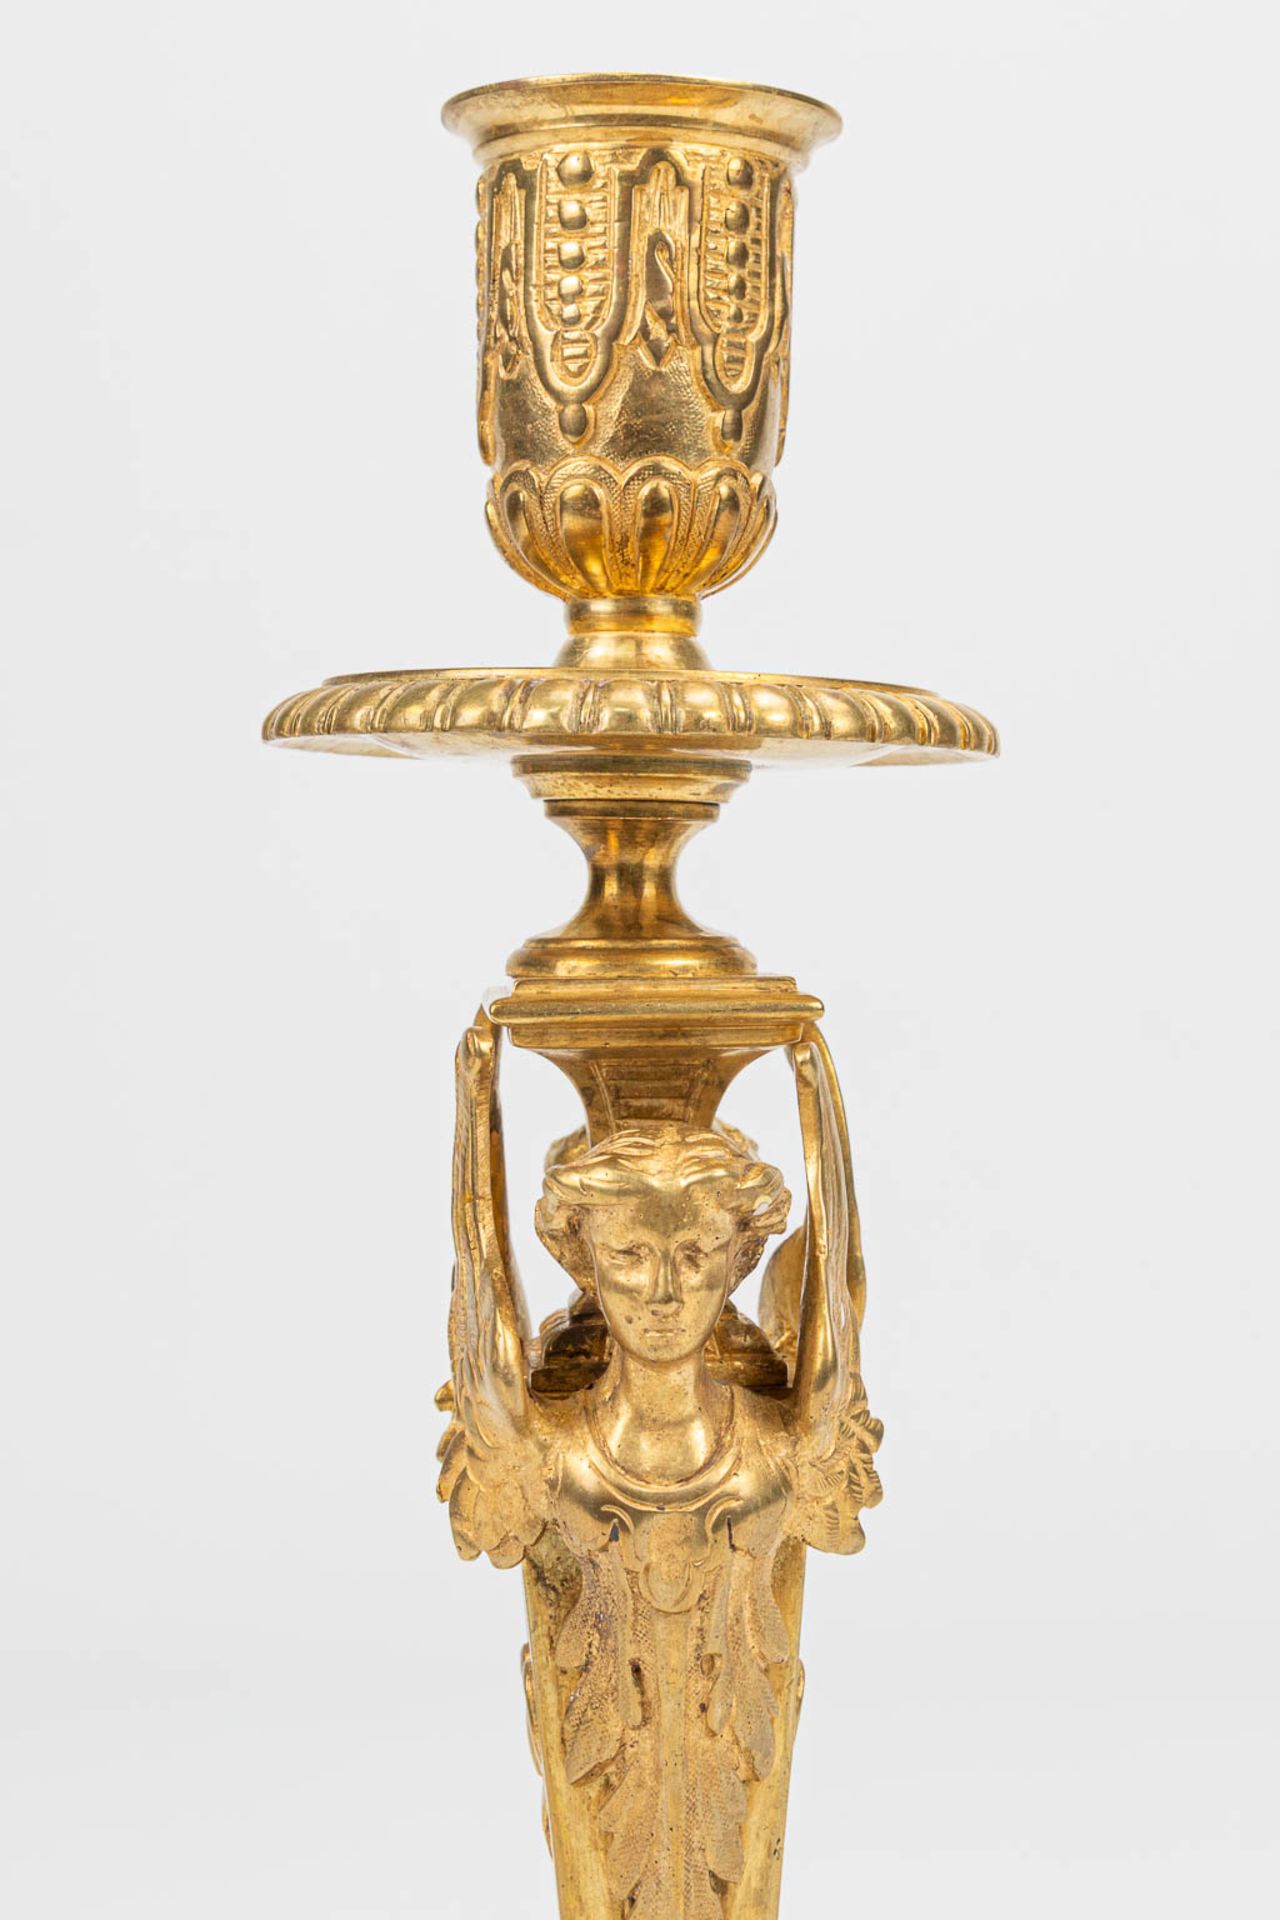 a pair of gilt Napoleon 3 bronze candlesticks, decorated with angels. (11 x 11 x 26,5 cm) - Image 6 of 6